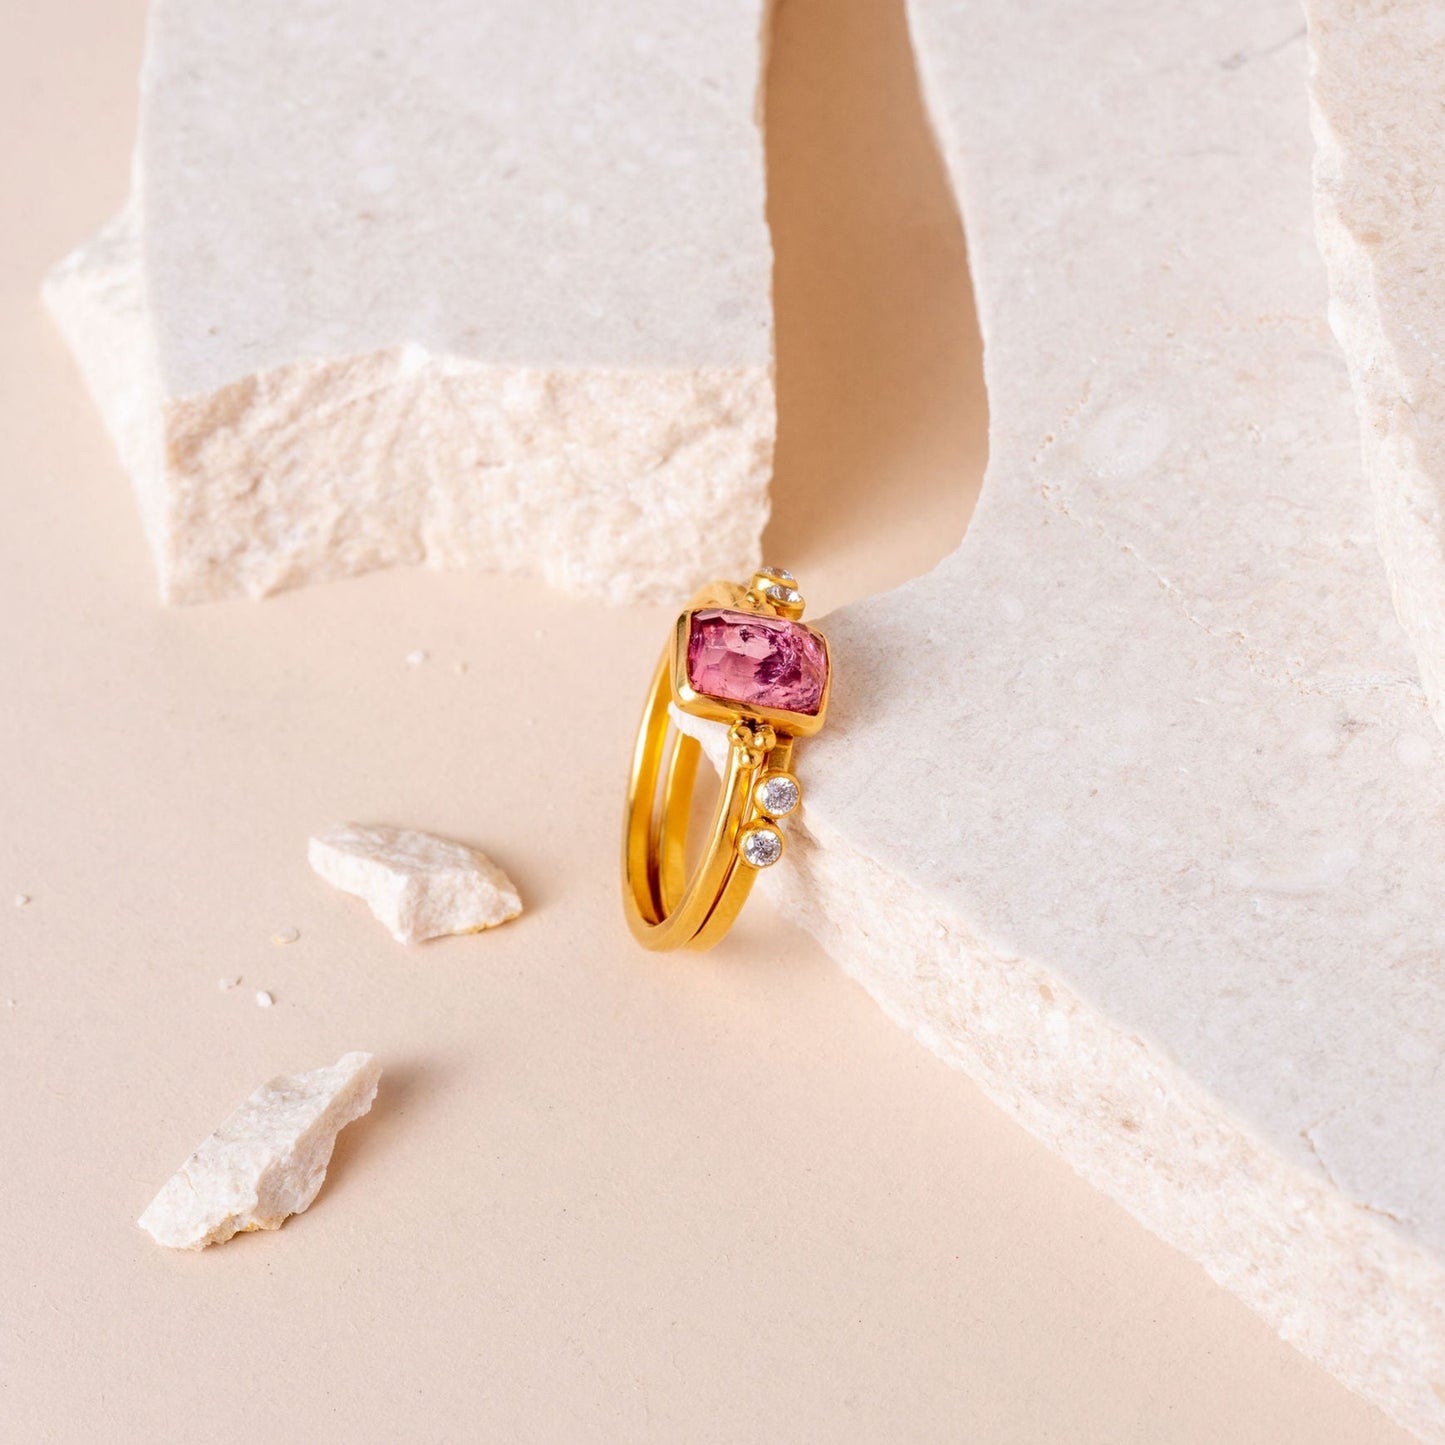 Artisanal ring design with intricate granulation complementing an organic hand-cut pink tourmaline.